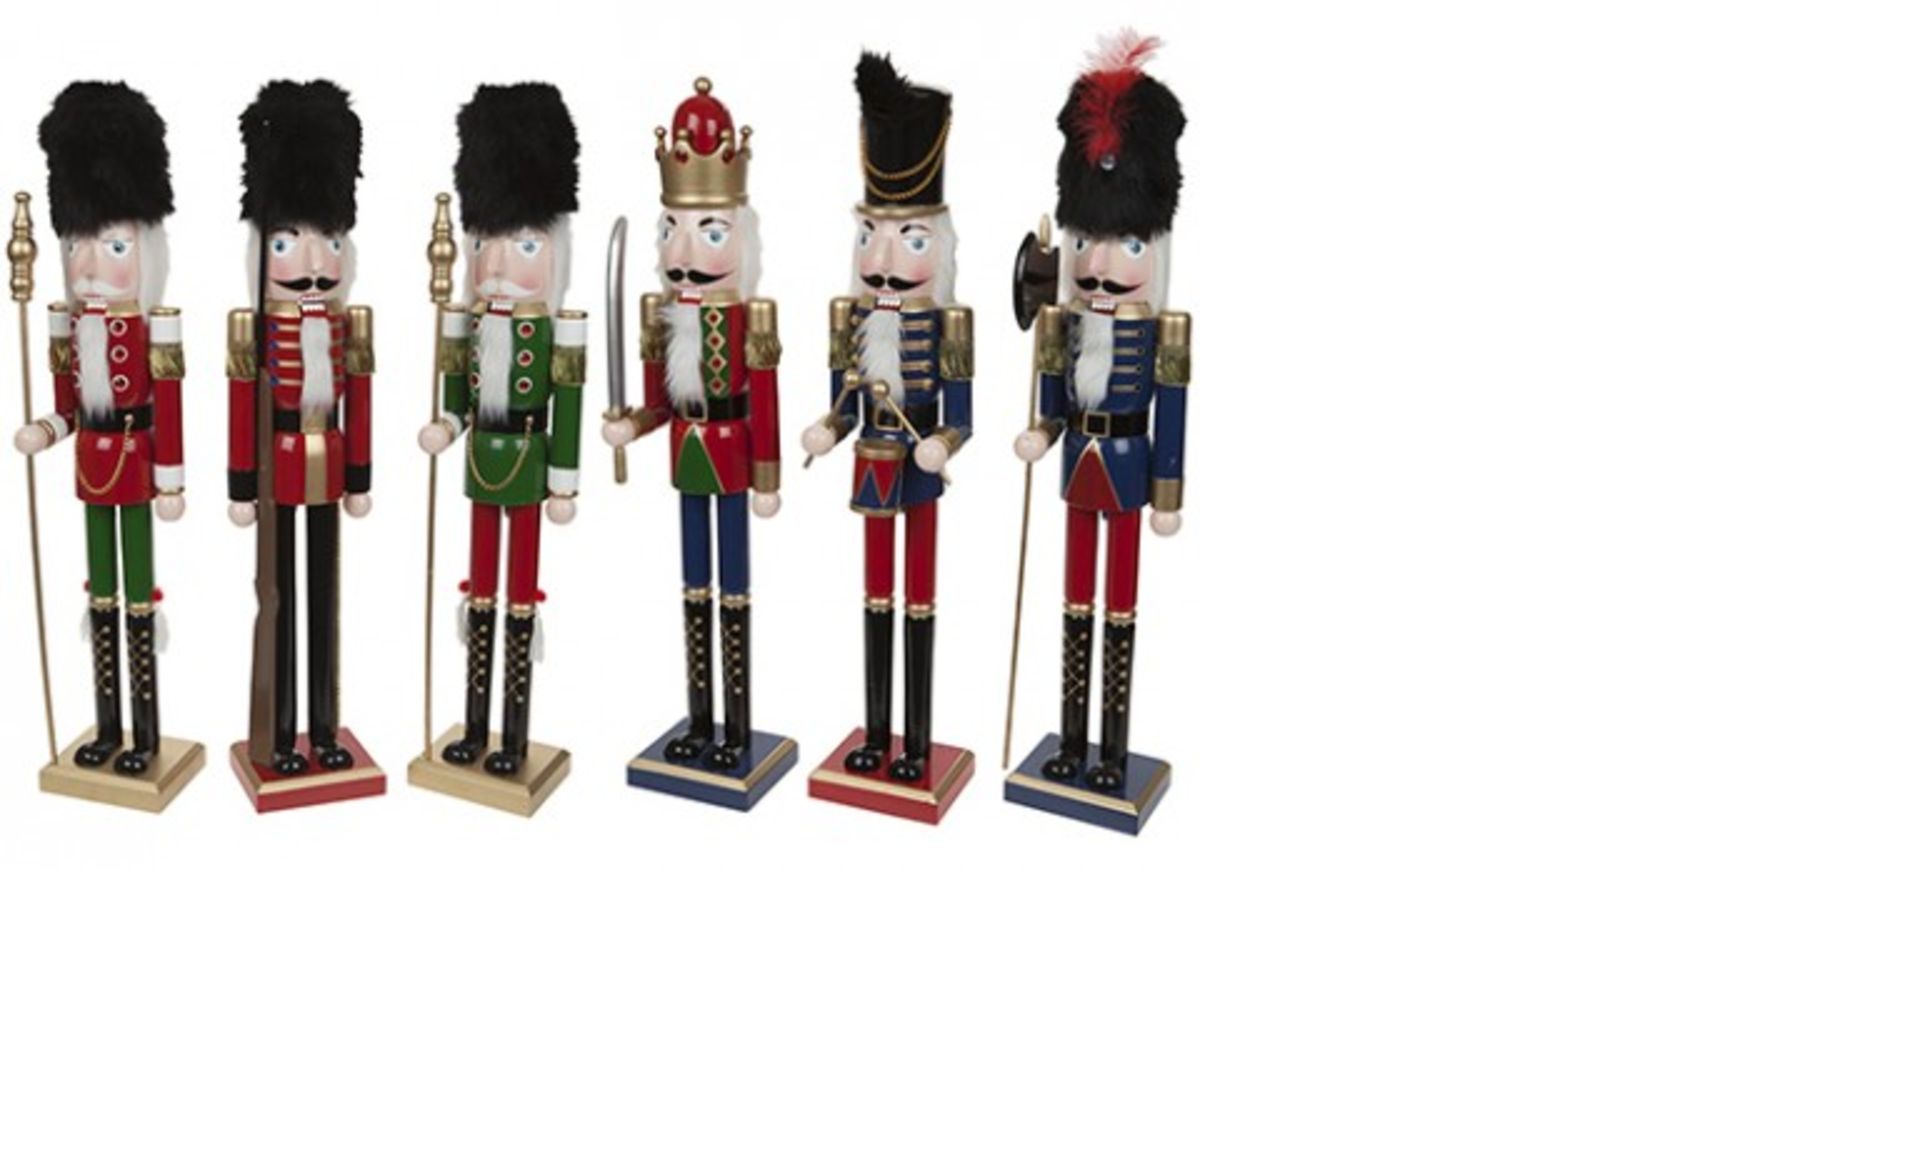 V Brand New Large wooden hand painted soldier nut-cracker/ornament - 24" tall X 2 YOUR BID PRICE